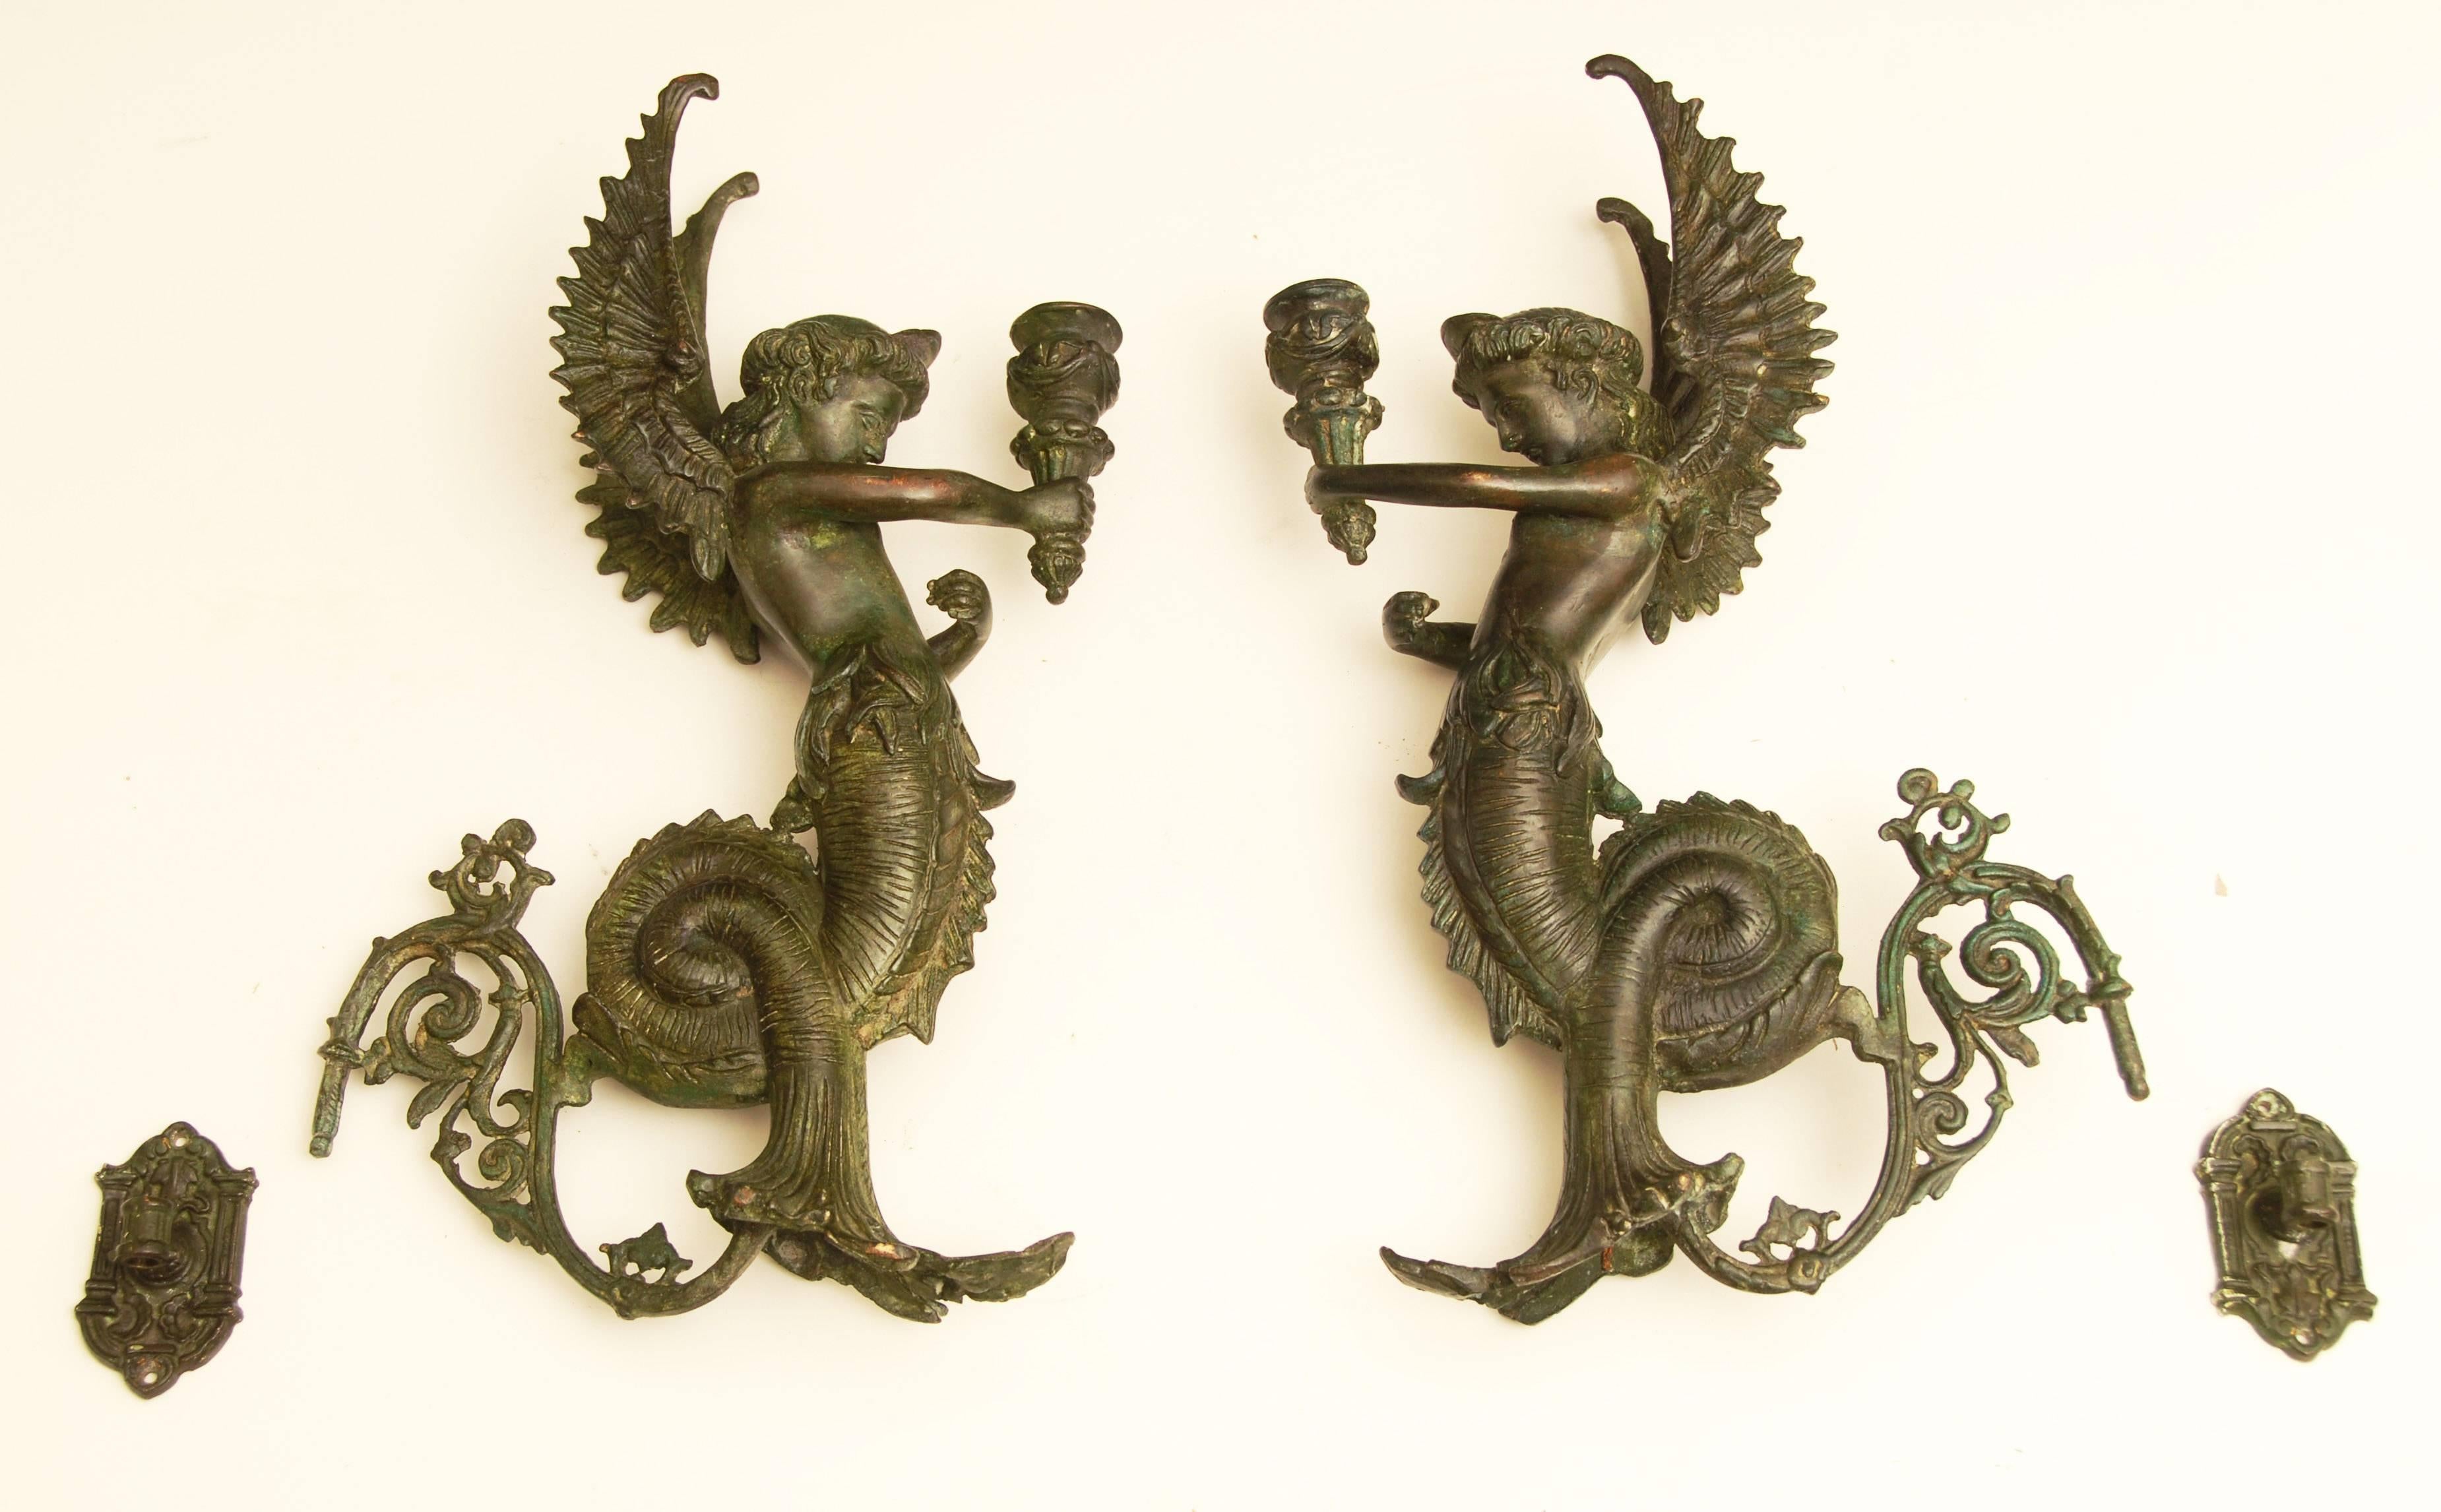 Magnificent pair of 16 inch high bronze Gothic Revival wall sconces/candelabras.
Depicting winged sea goddesses with serpent/fish tails holding torches.
Dating from circa 1900.
Requiring just two screws to each holding bracket, weighing 3 kg